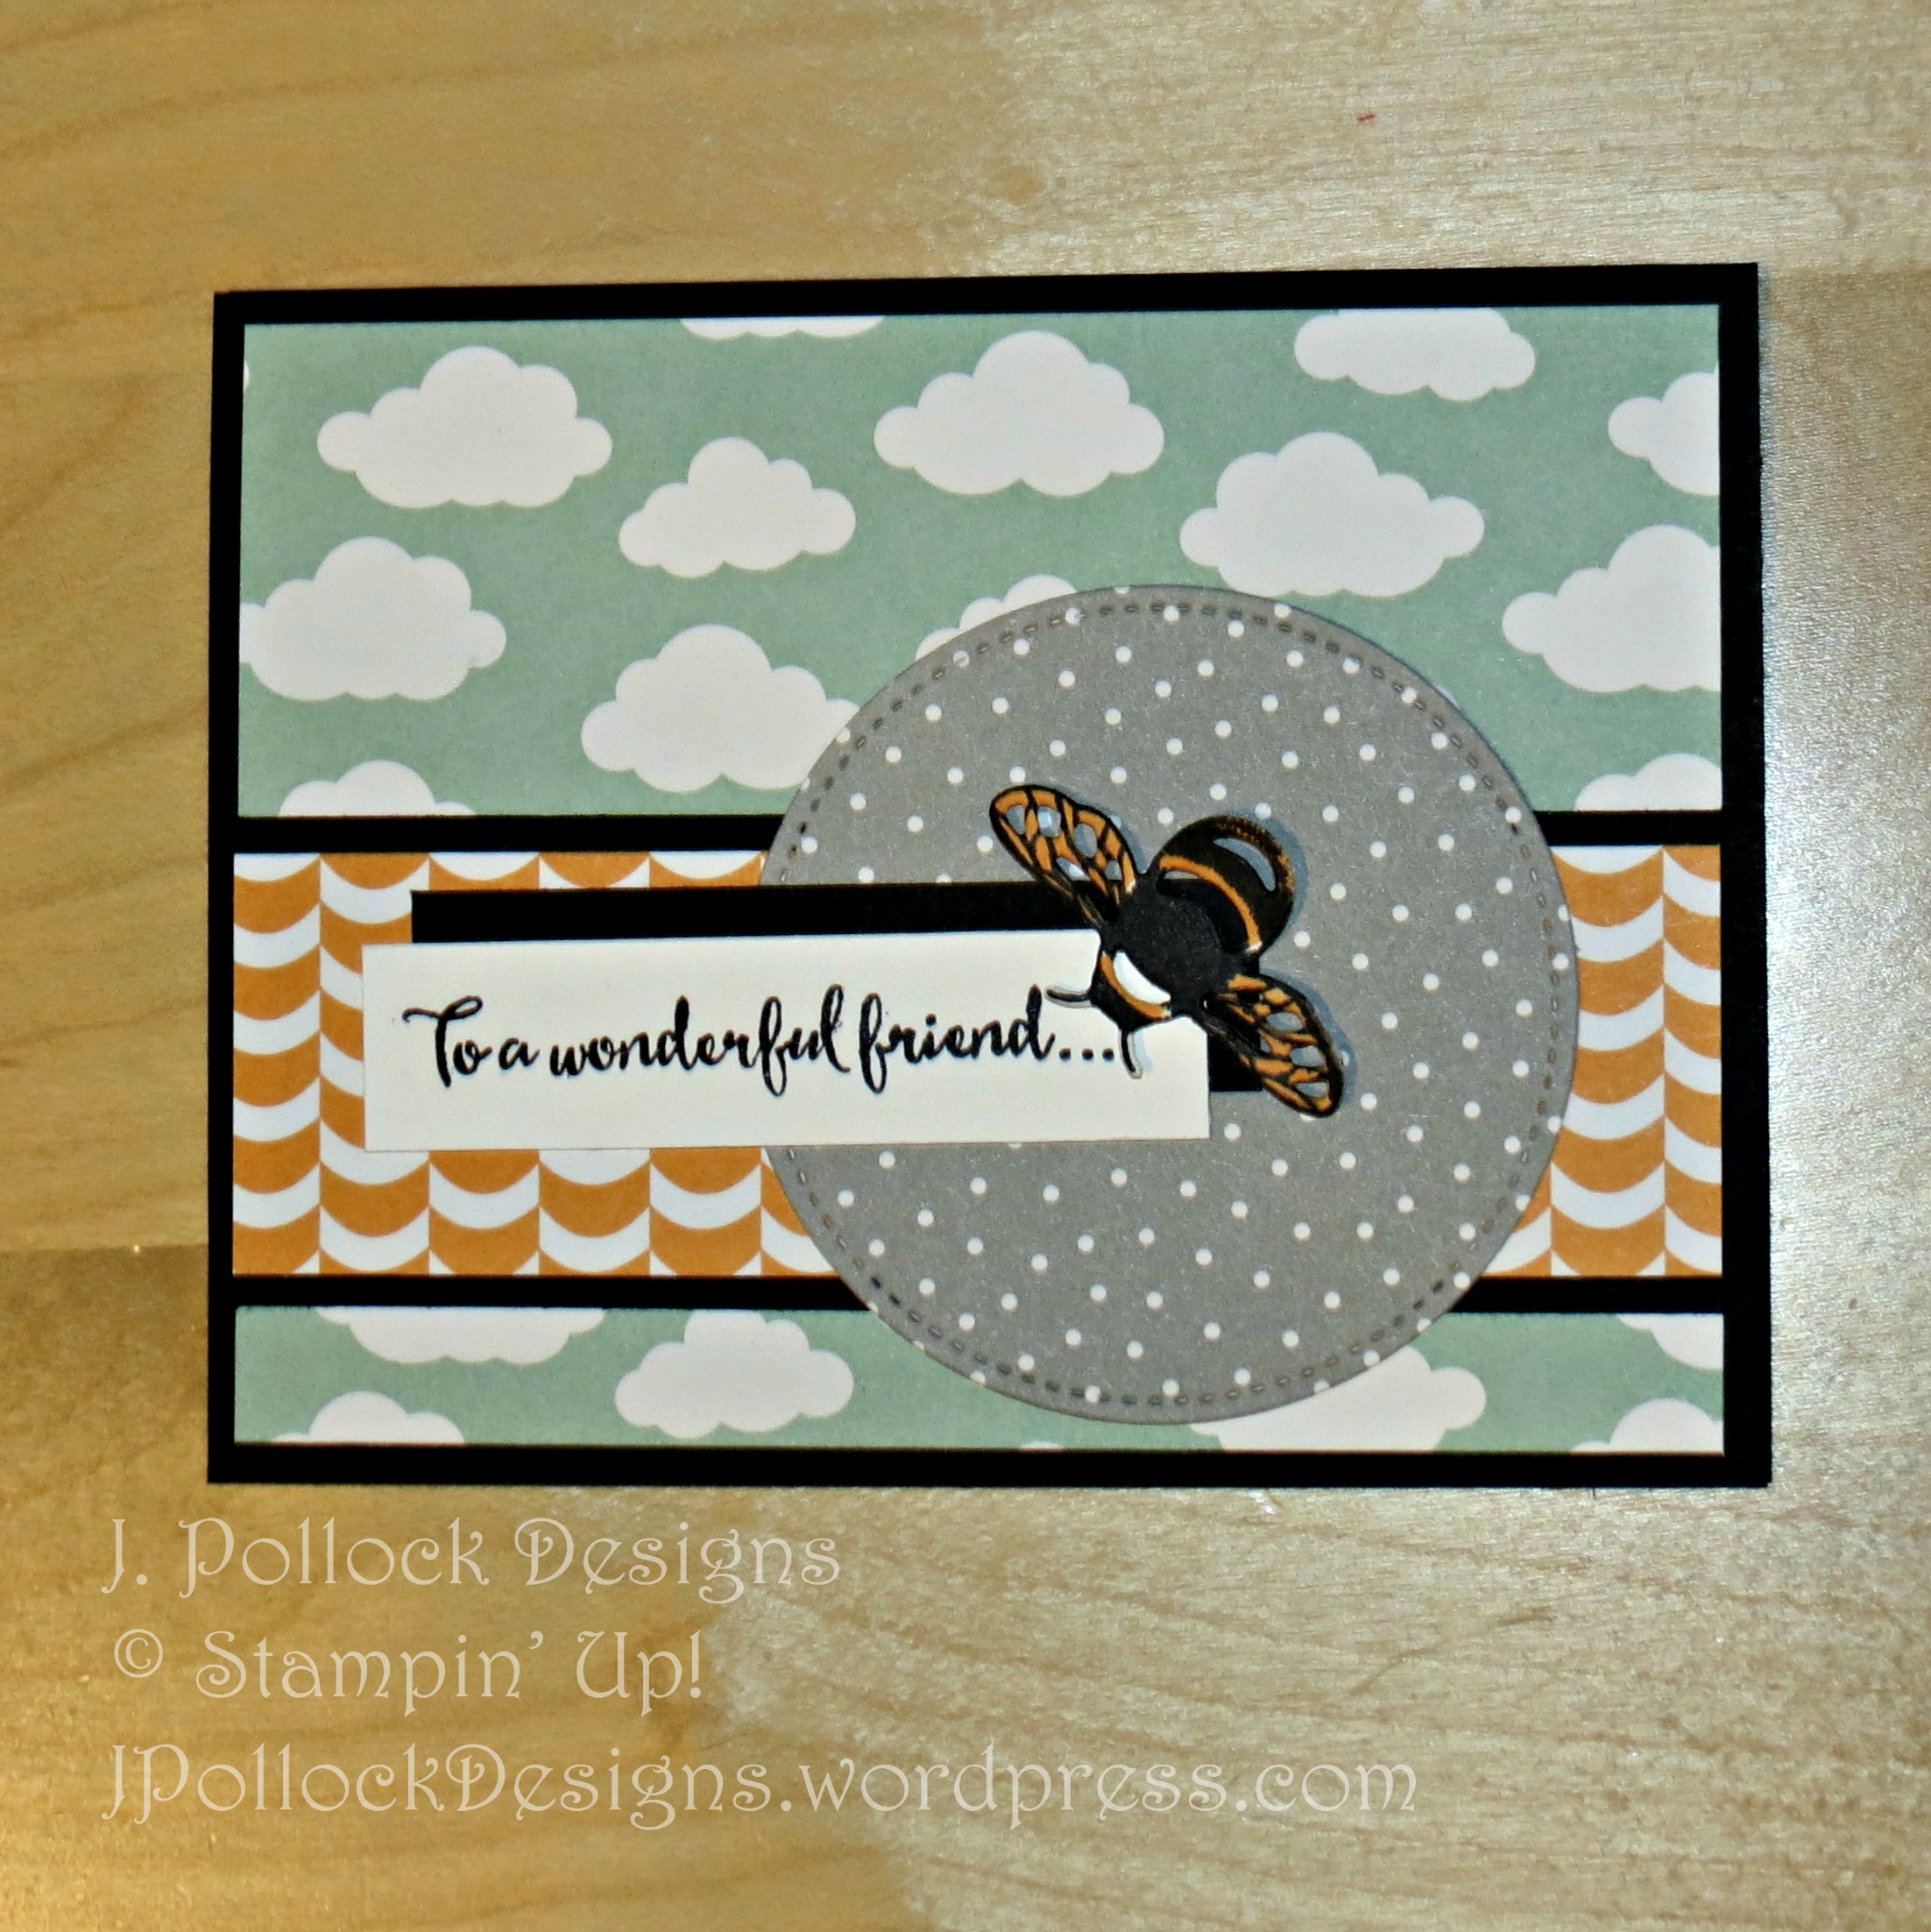 J. Pollock Designs - Stampin' UP! Dragonfly Dreams, Detailed Dragonfly thinlets